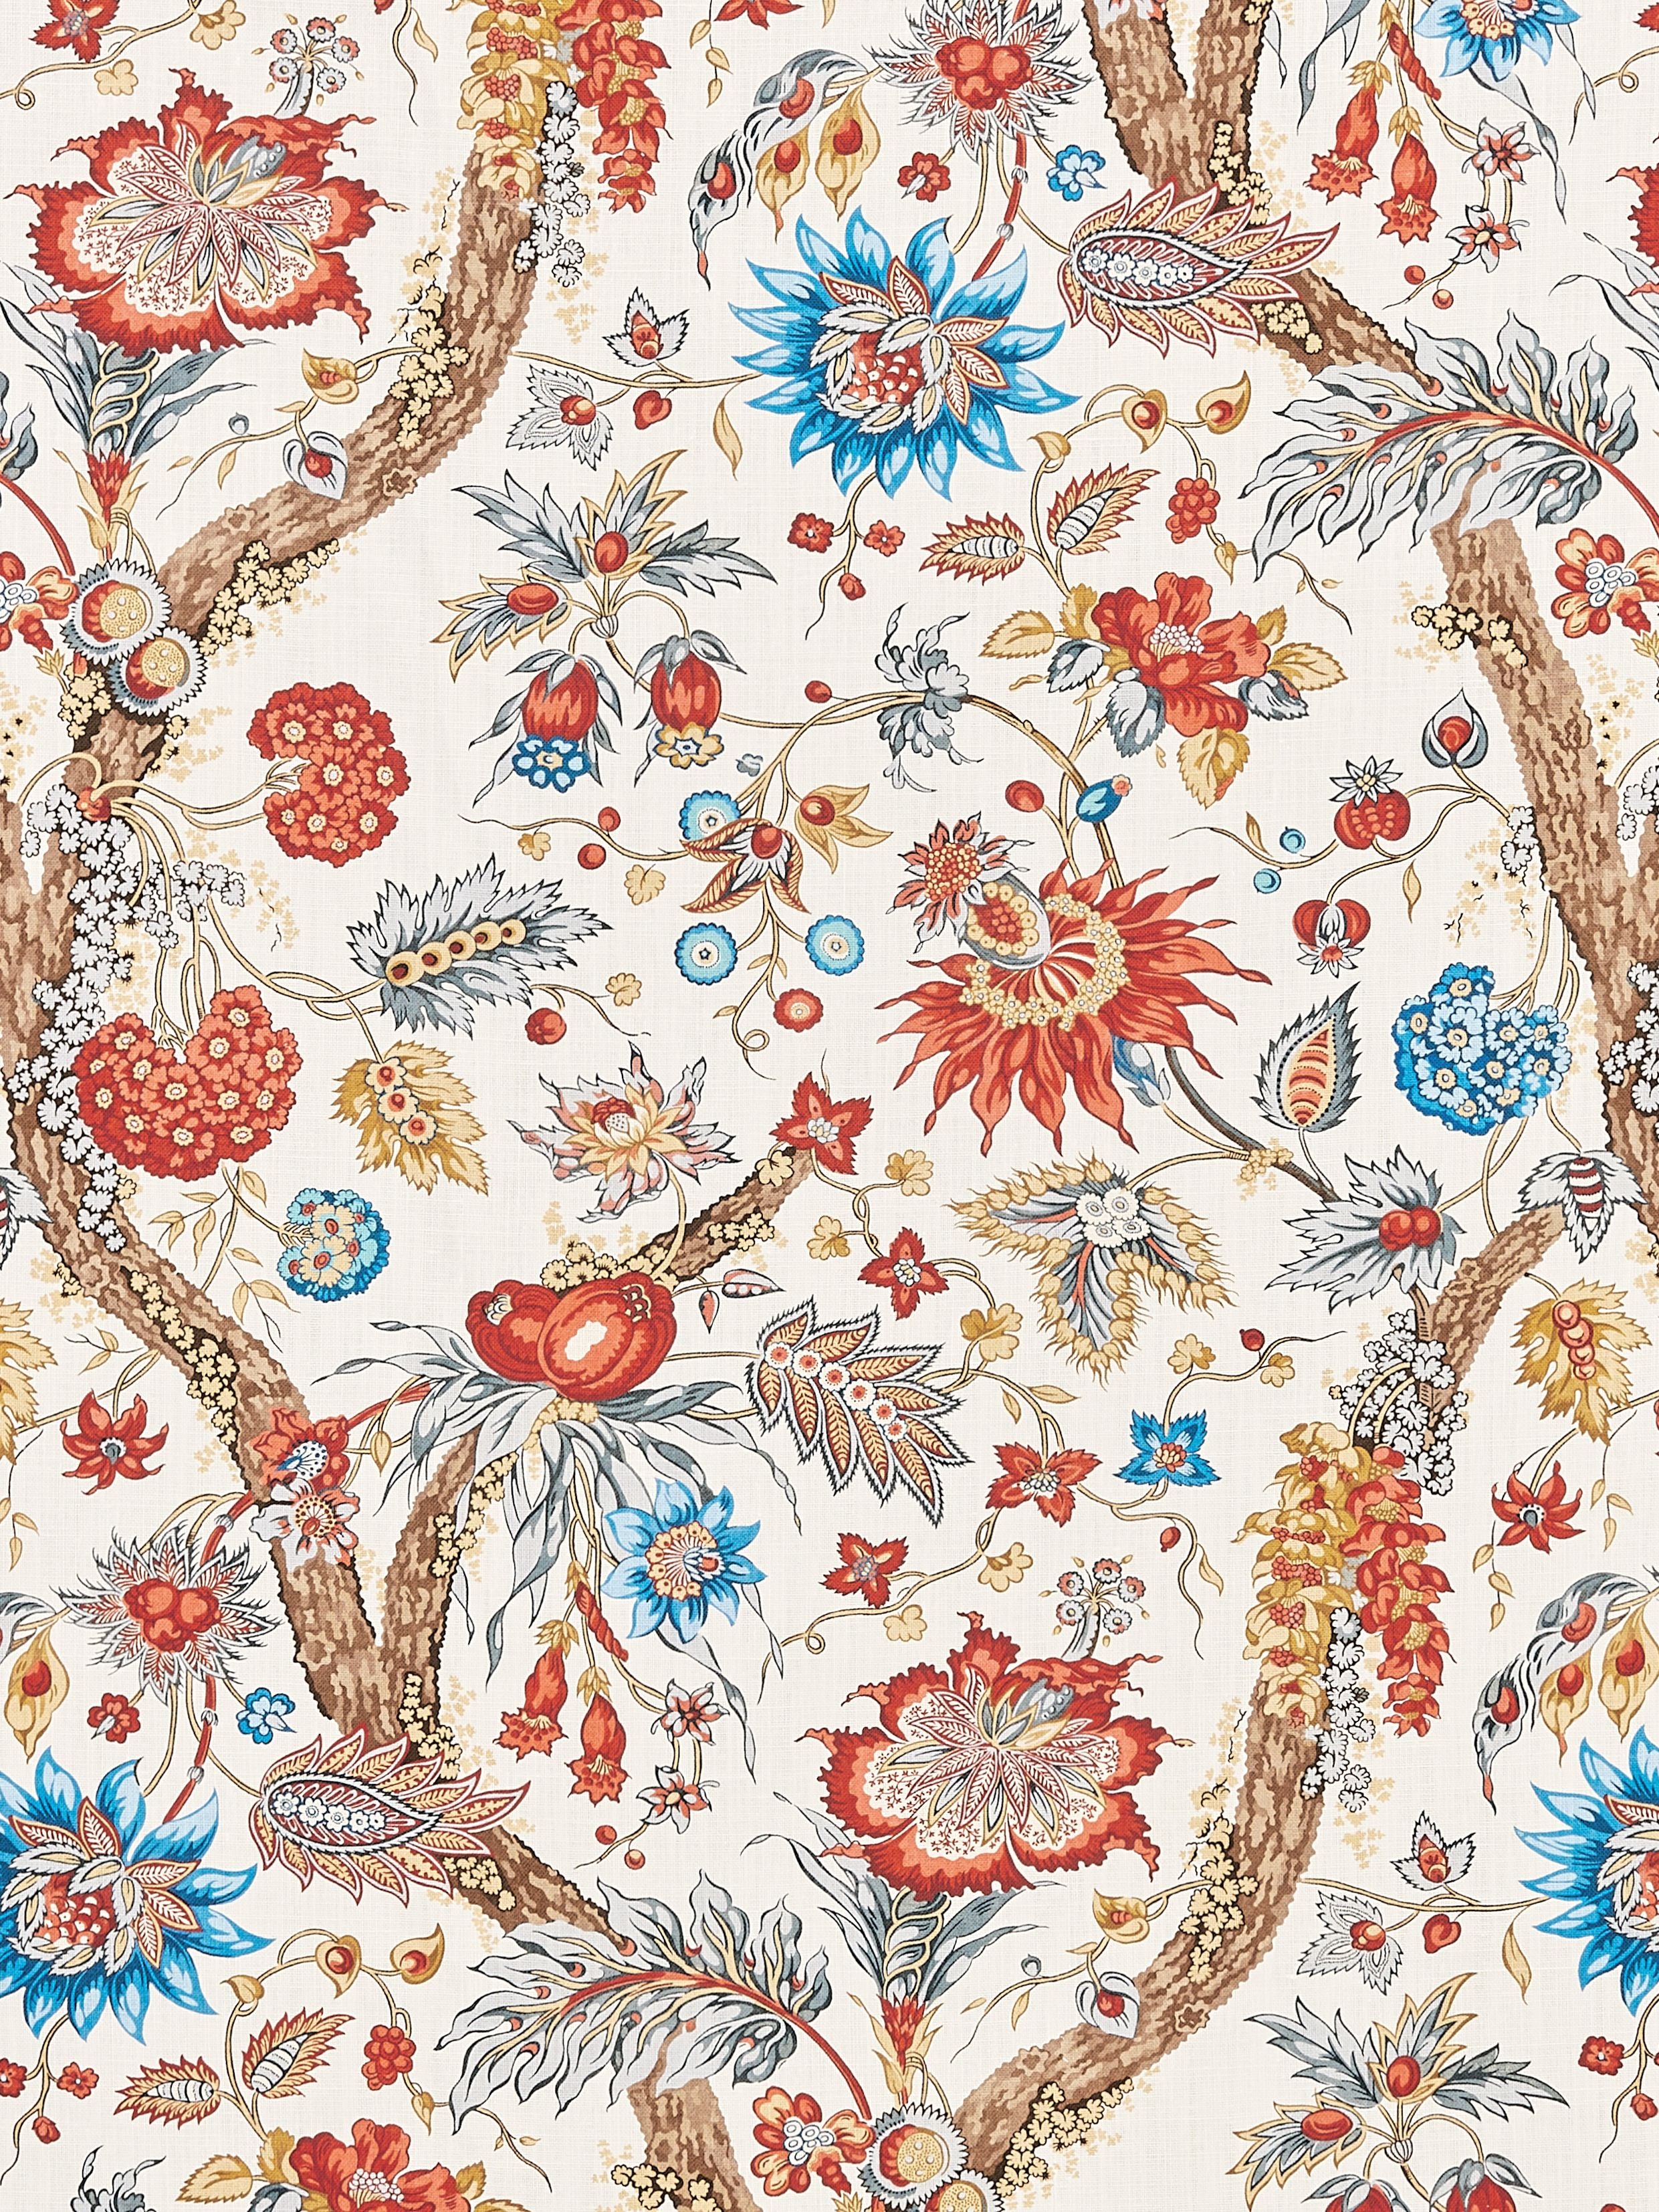 Fleurs Tropicales fabric in autumn multi color - pattern number SC 000316647 - by Scalamandre in the Scalamandre Fabrics Book 1 collection